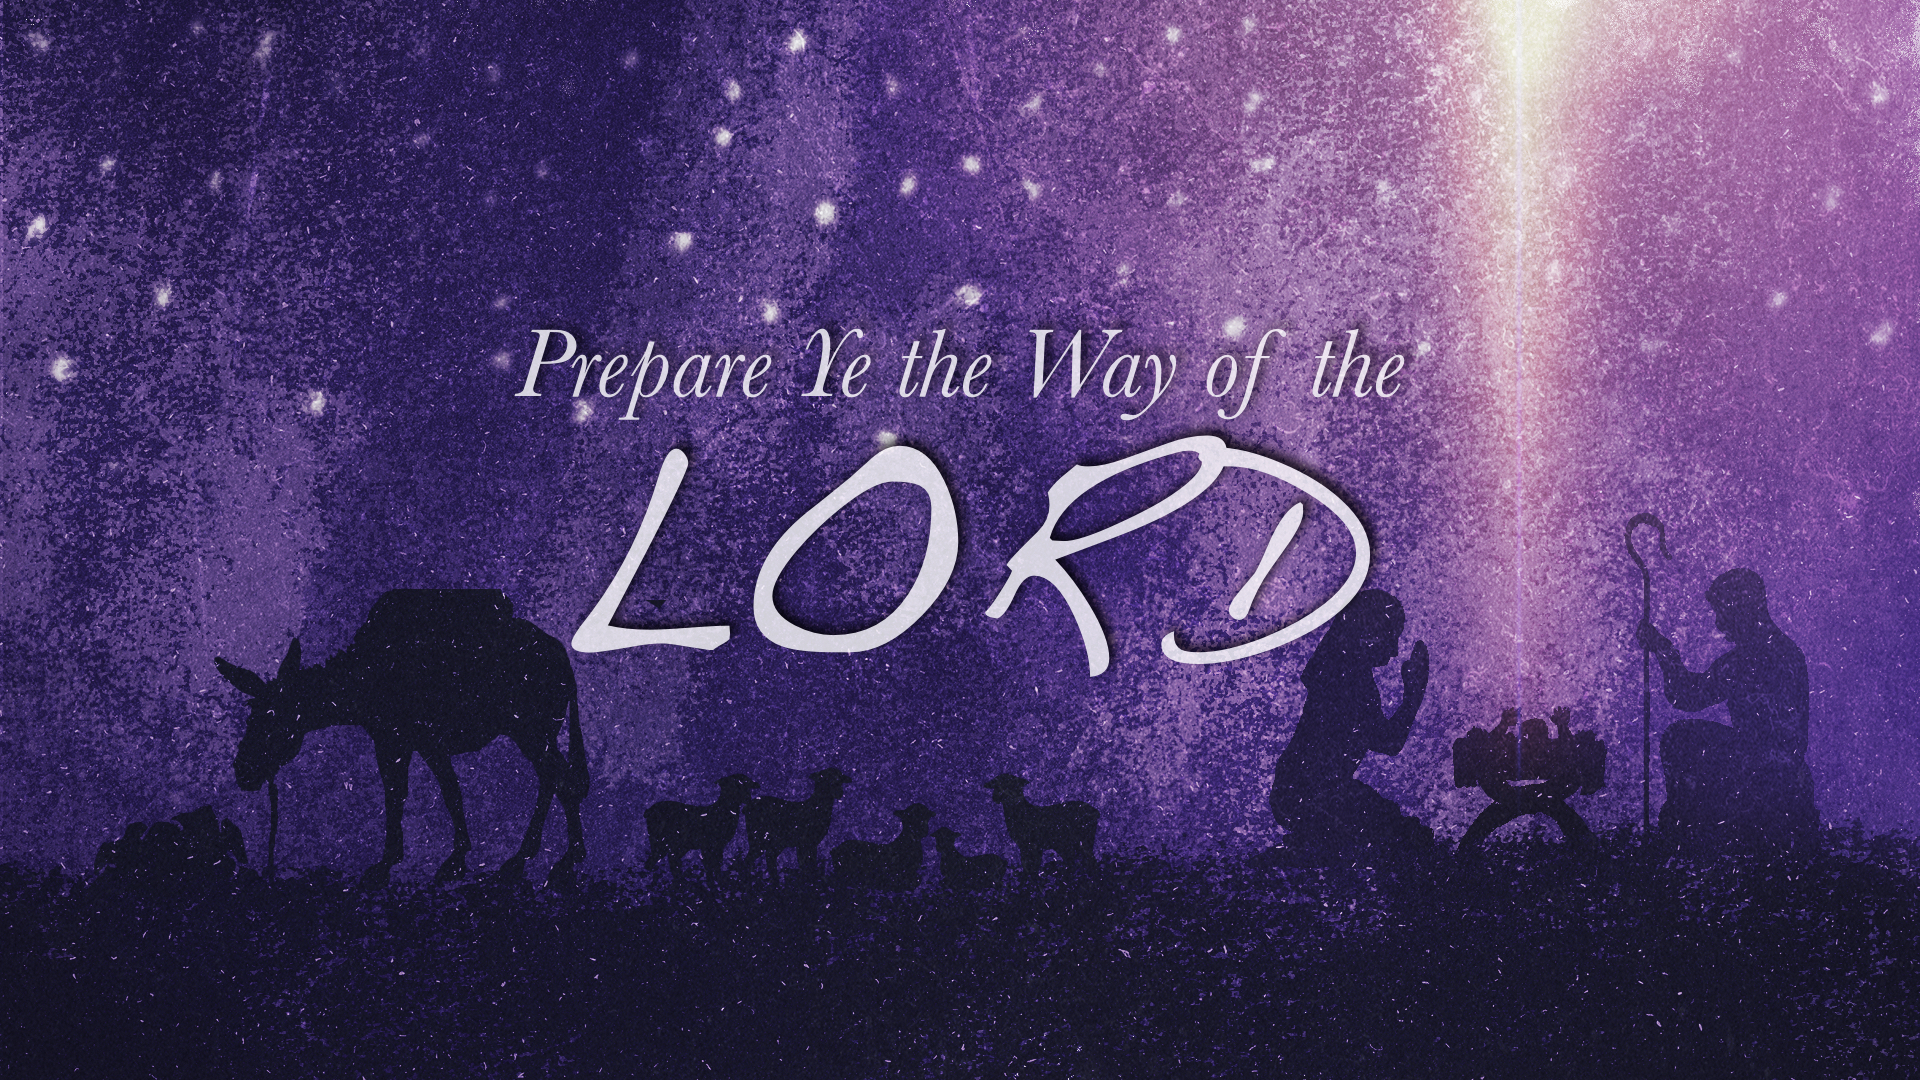 prepare ye the way of the lord